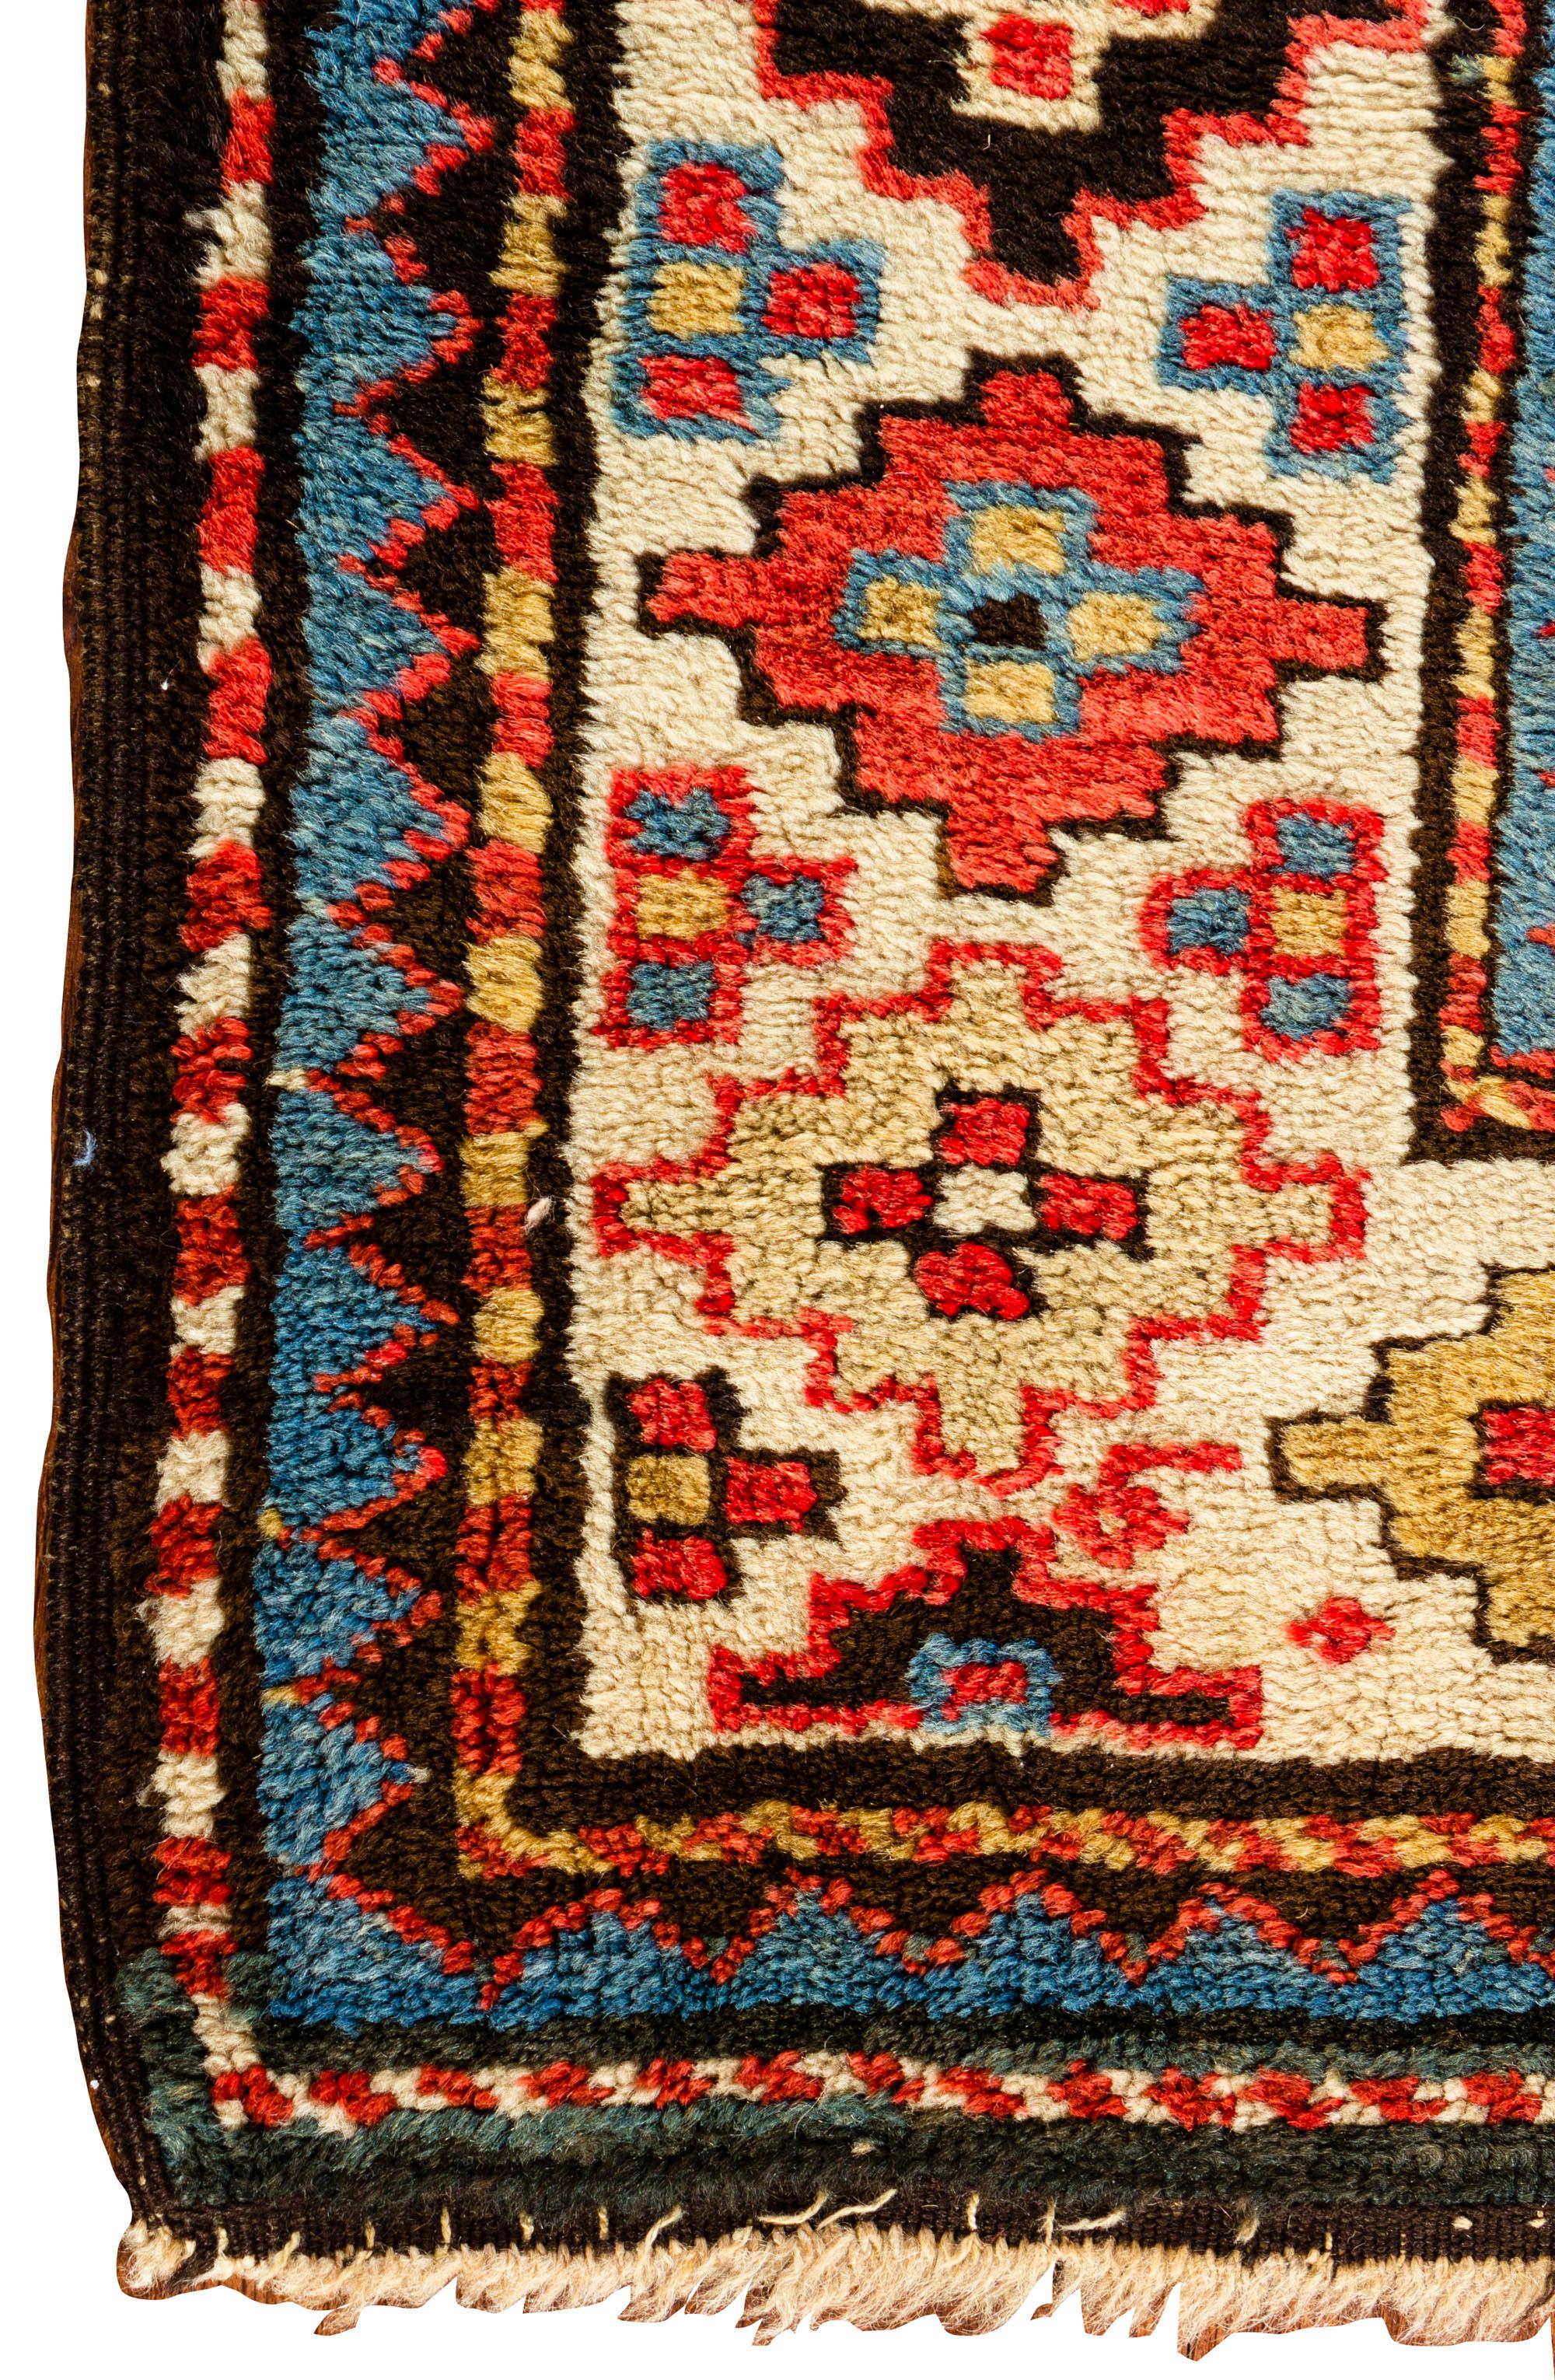 Antique Caucasian Alpan Kuba rug, circa 1890. From eastern Caucasia a handwoven antique Alpan Kuba rug, circa 1890. The wonderful tribal designs in the centre comprising of three distinct areas in shades of green, rust and blue split by four